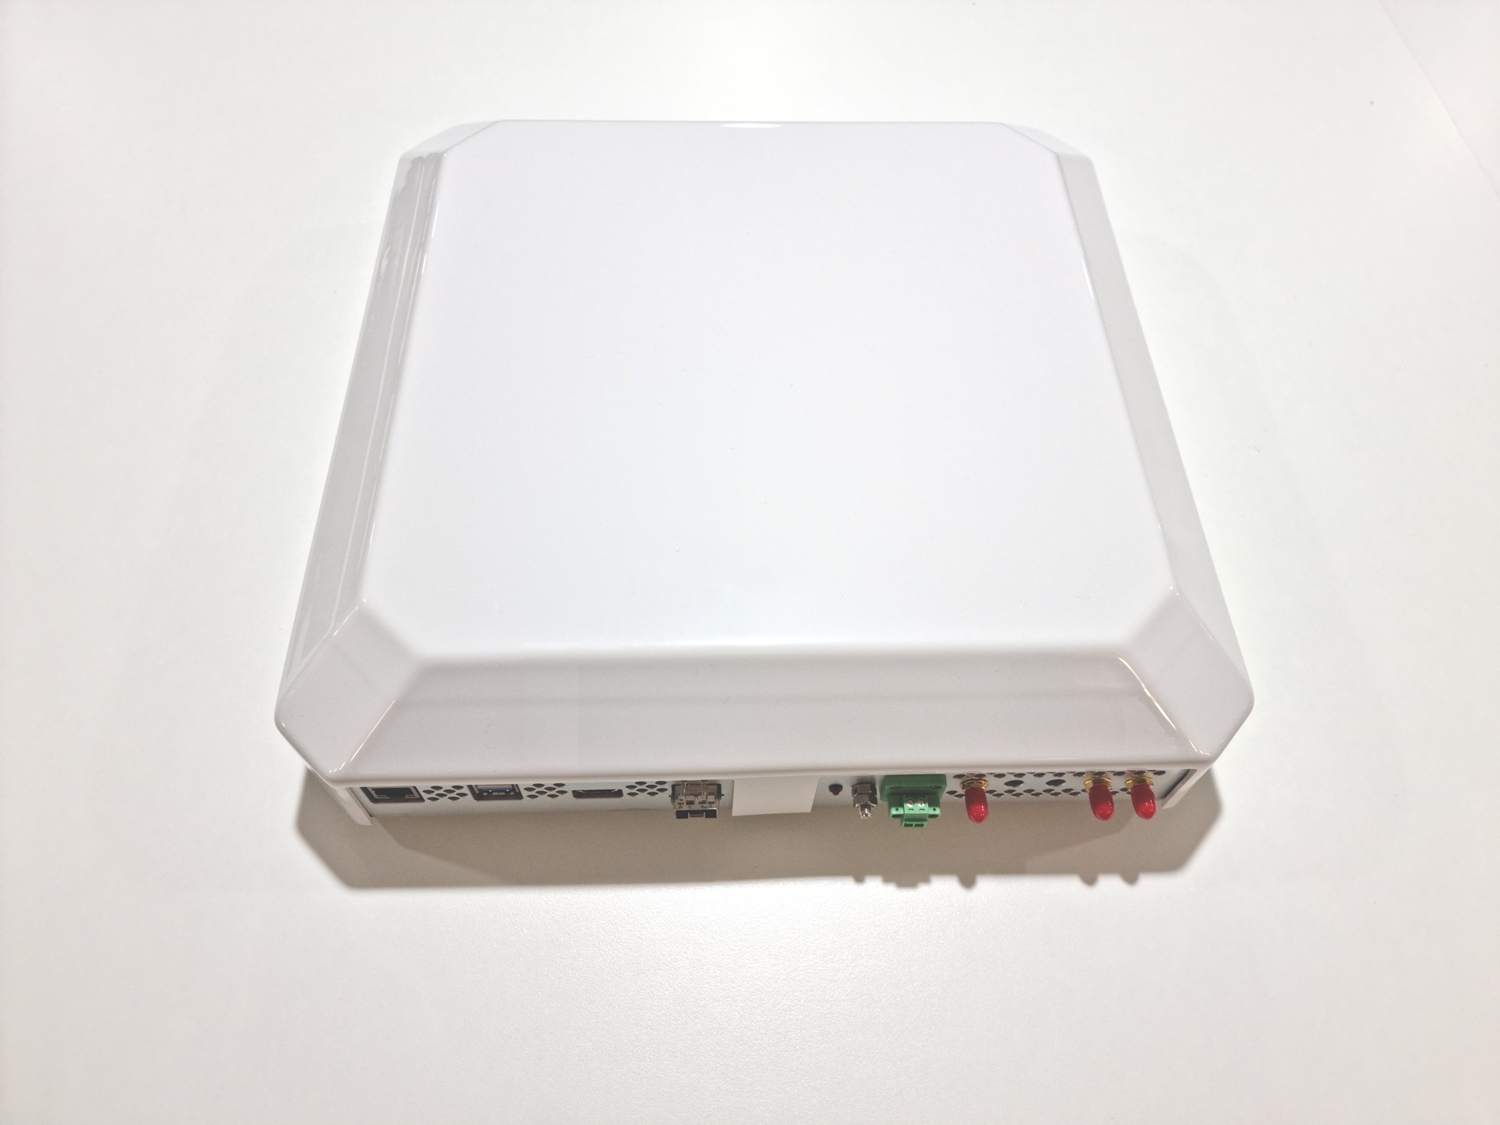 https://www.cablefree.net/wp-content/uploads/2023/04/CableFree-Indoor-Small-Cell-2x2-20220211_182024.jpg